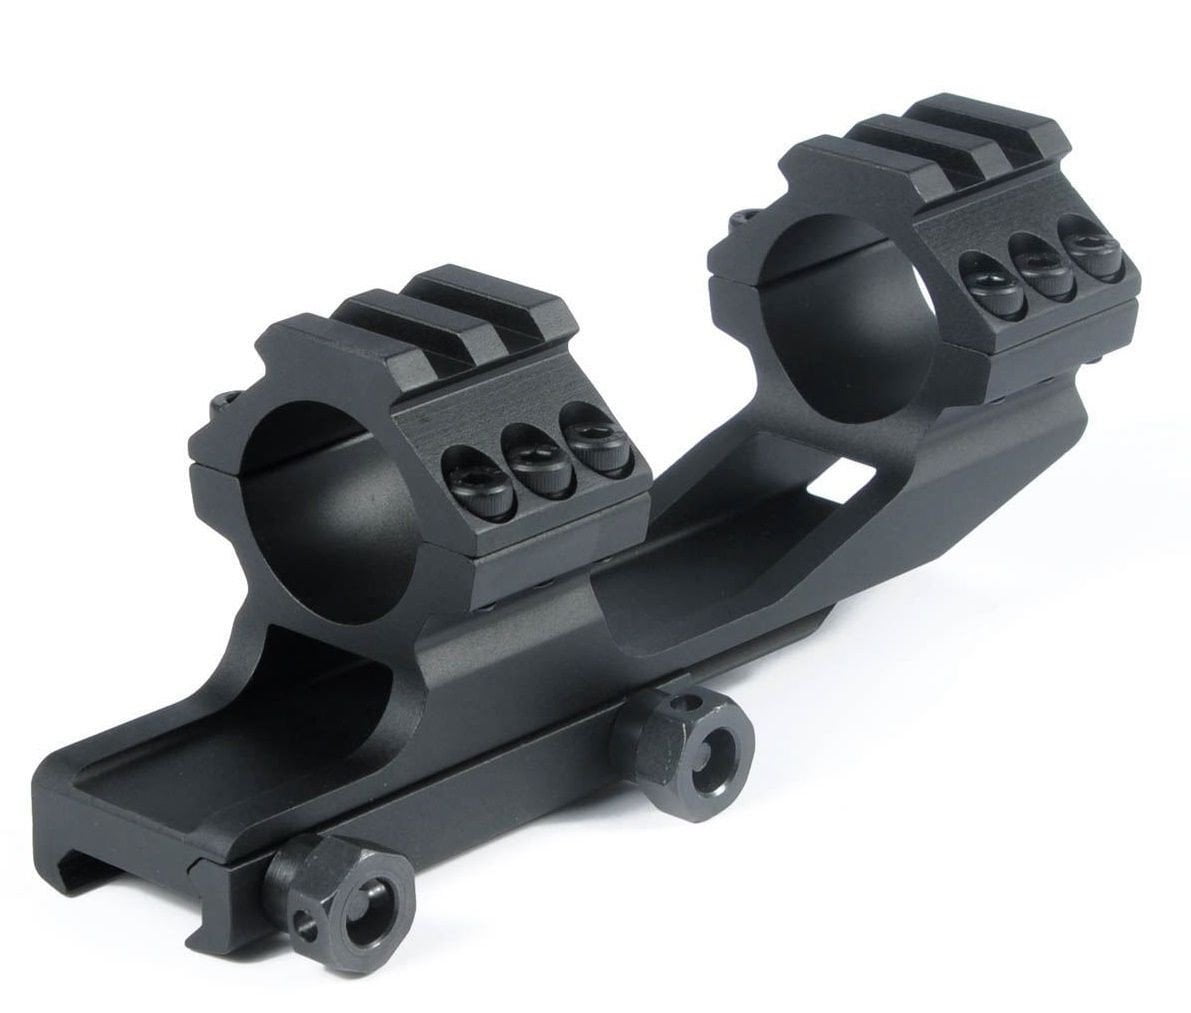 Cantilever Dual Ring Scope Base Mount for 25.4mm 30mm Riflescope Quick Release Weaver